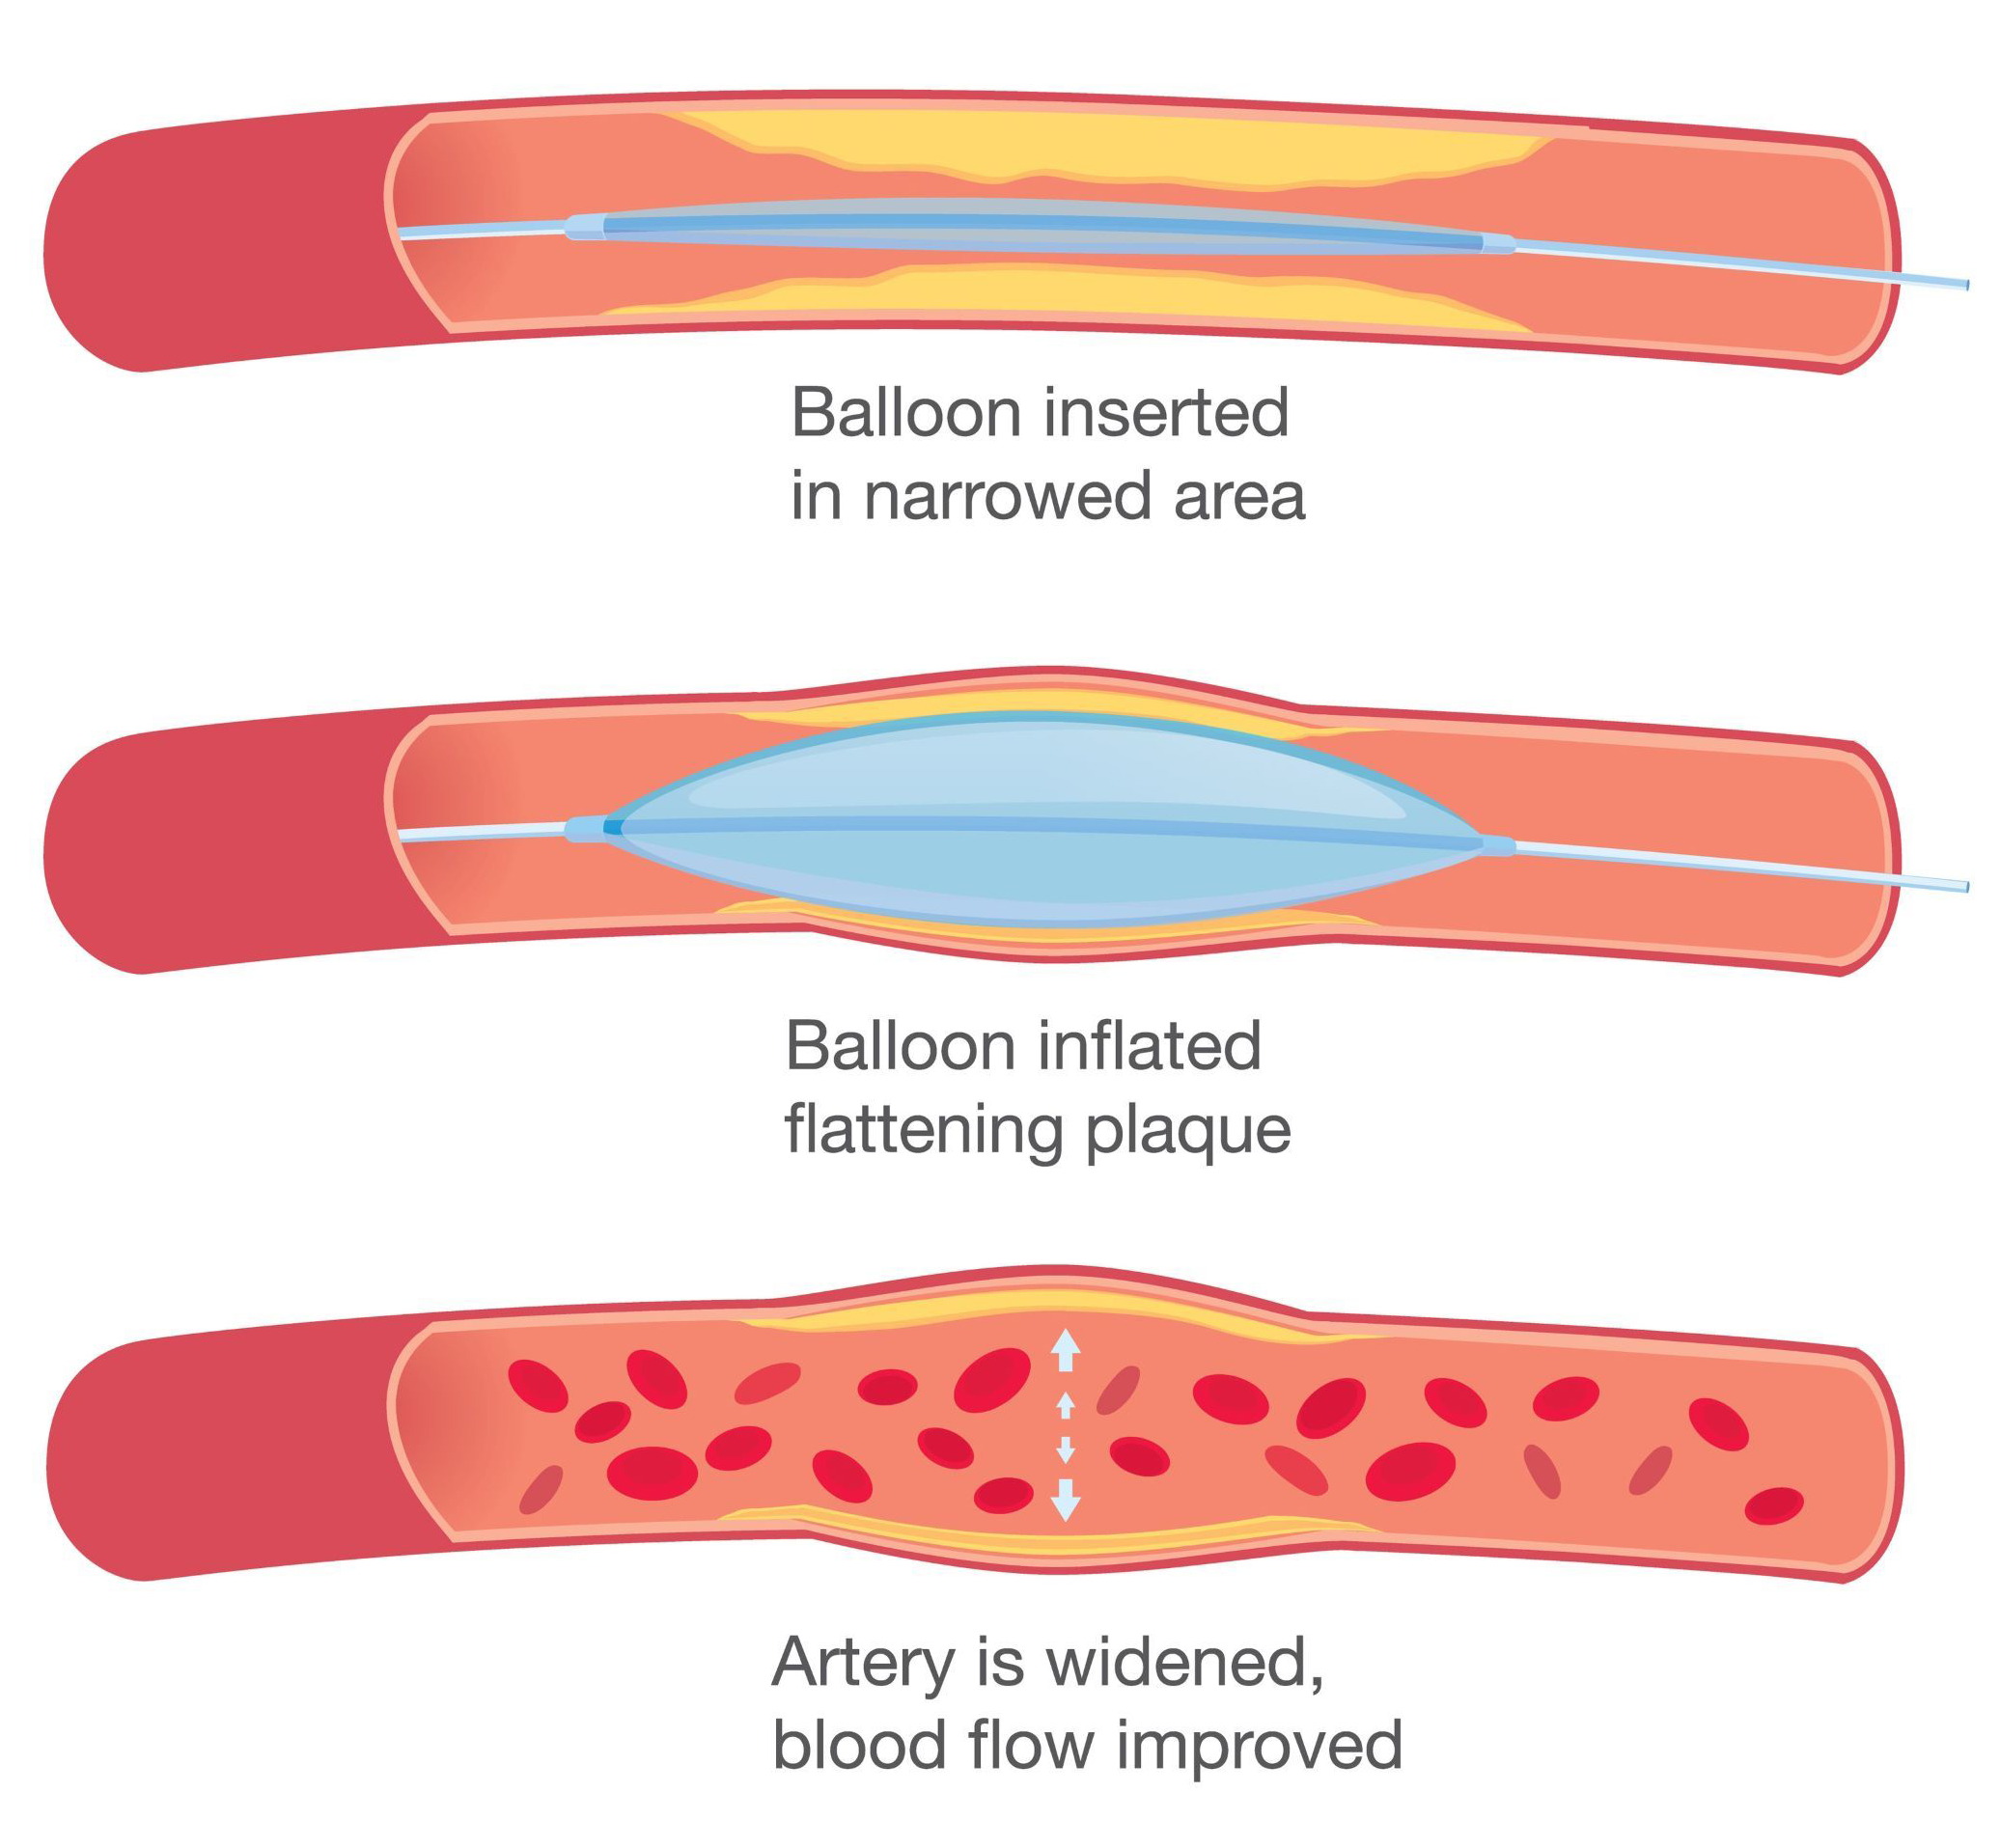 Balloon inserted in narrow area, inflated flattening plaque, artery is widened, blood flow improved